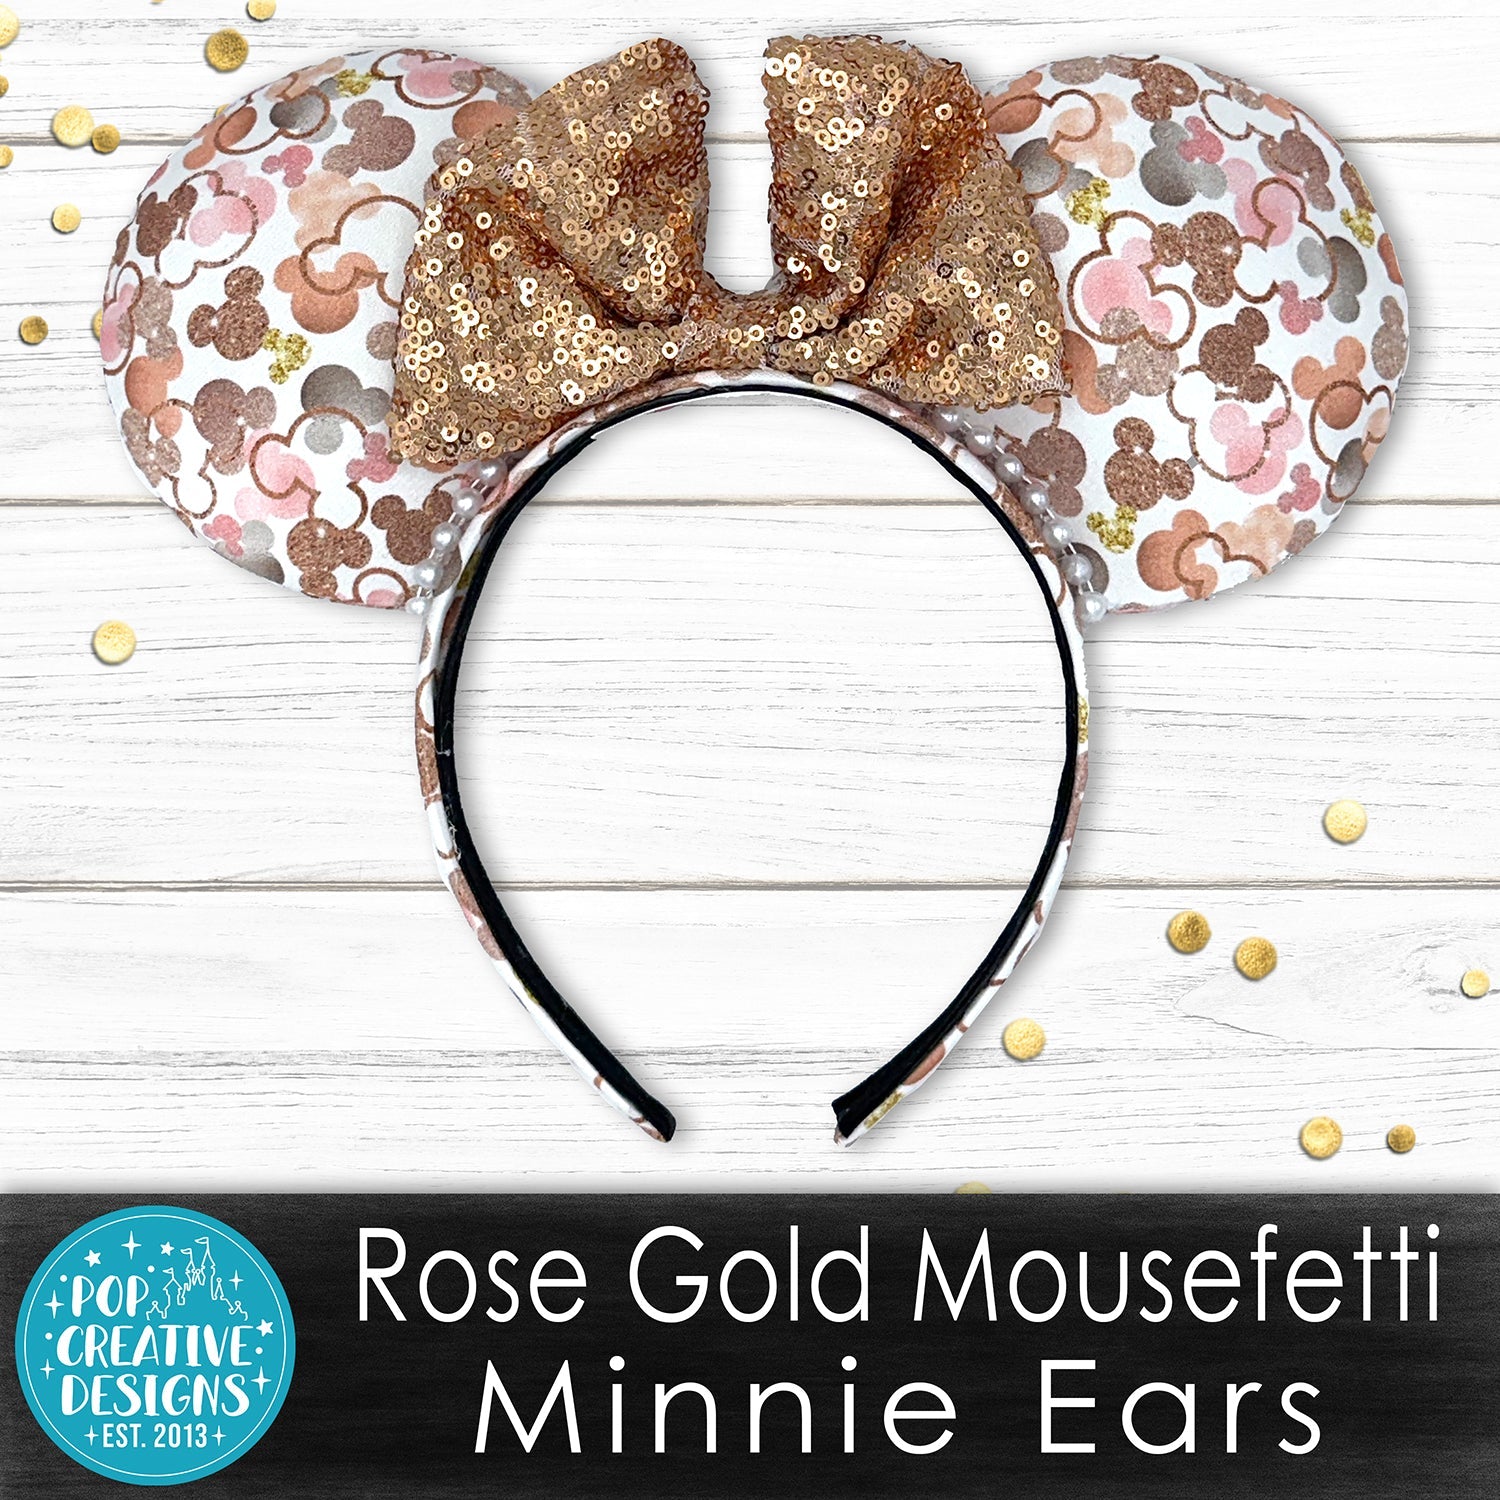 Rose Gold Mousefetti Minnie Ears